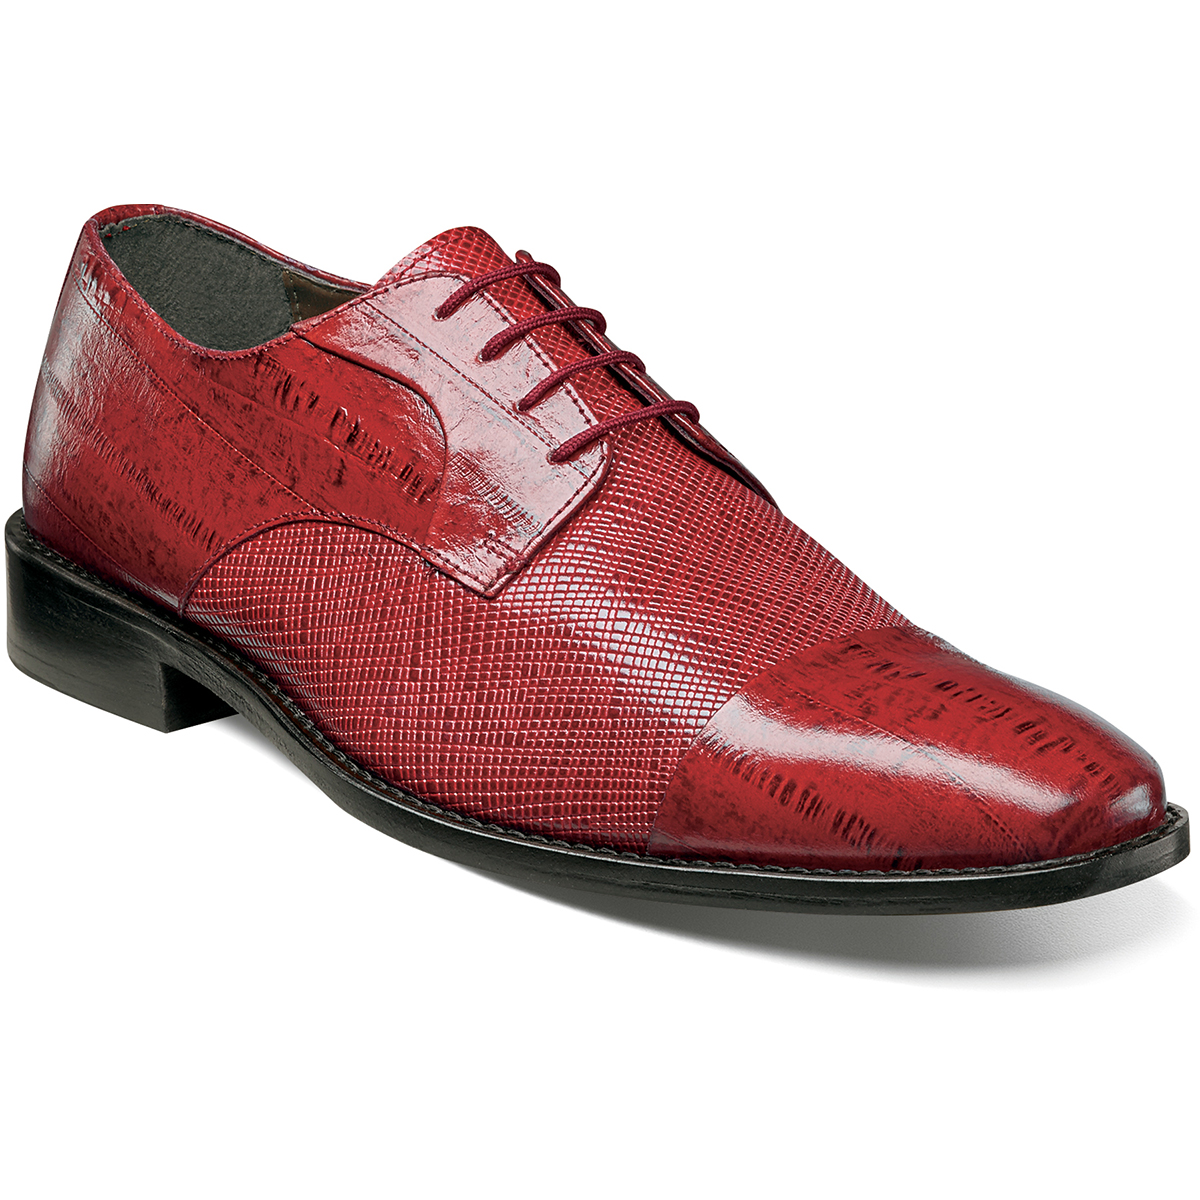 Men's Dress Shoes | Red Cap Toe Lace Up | Stacy Adams Gatto